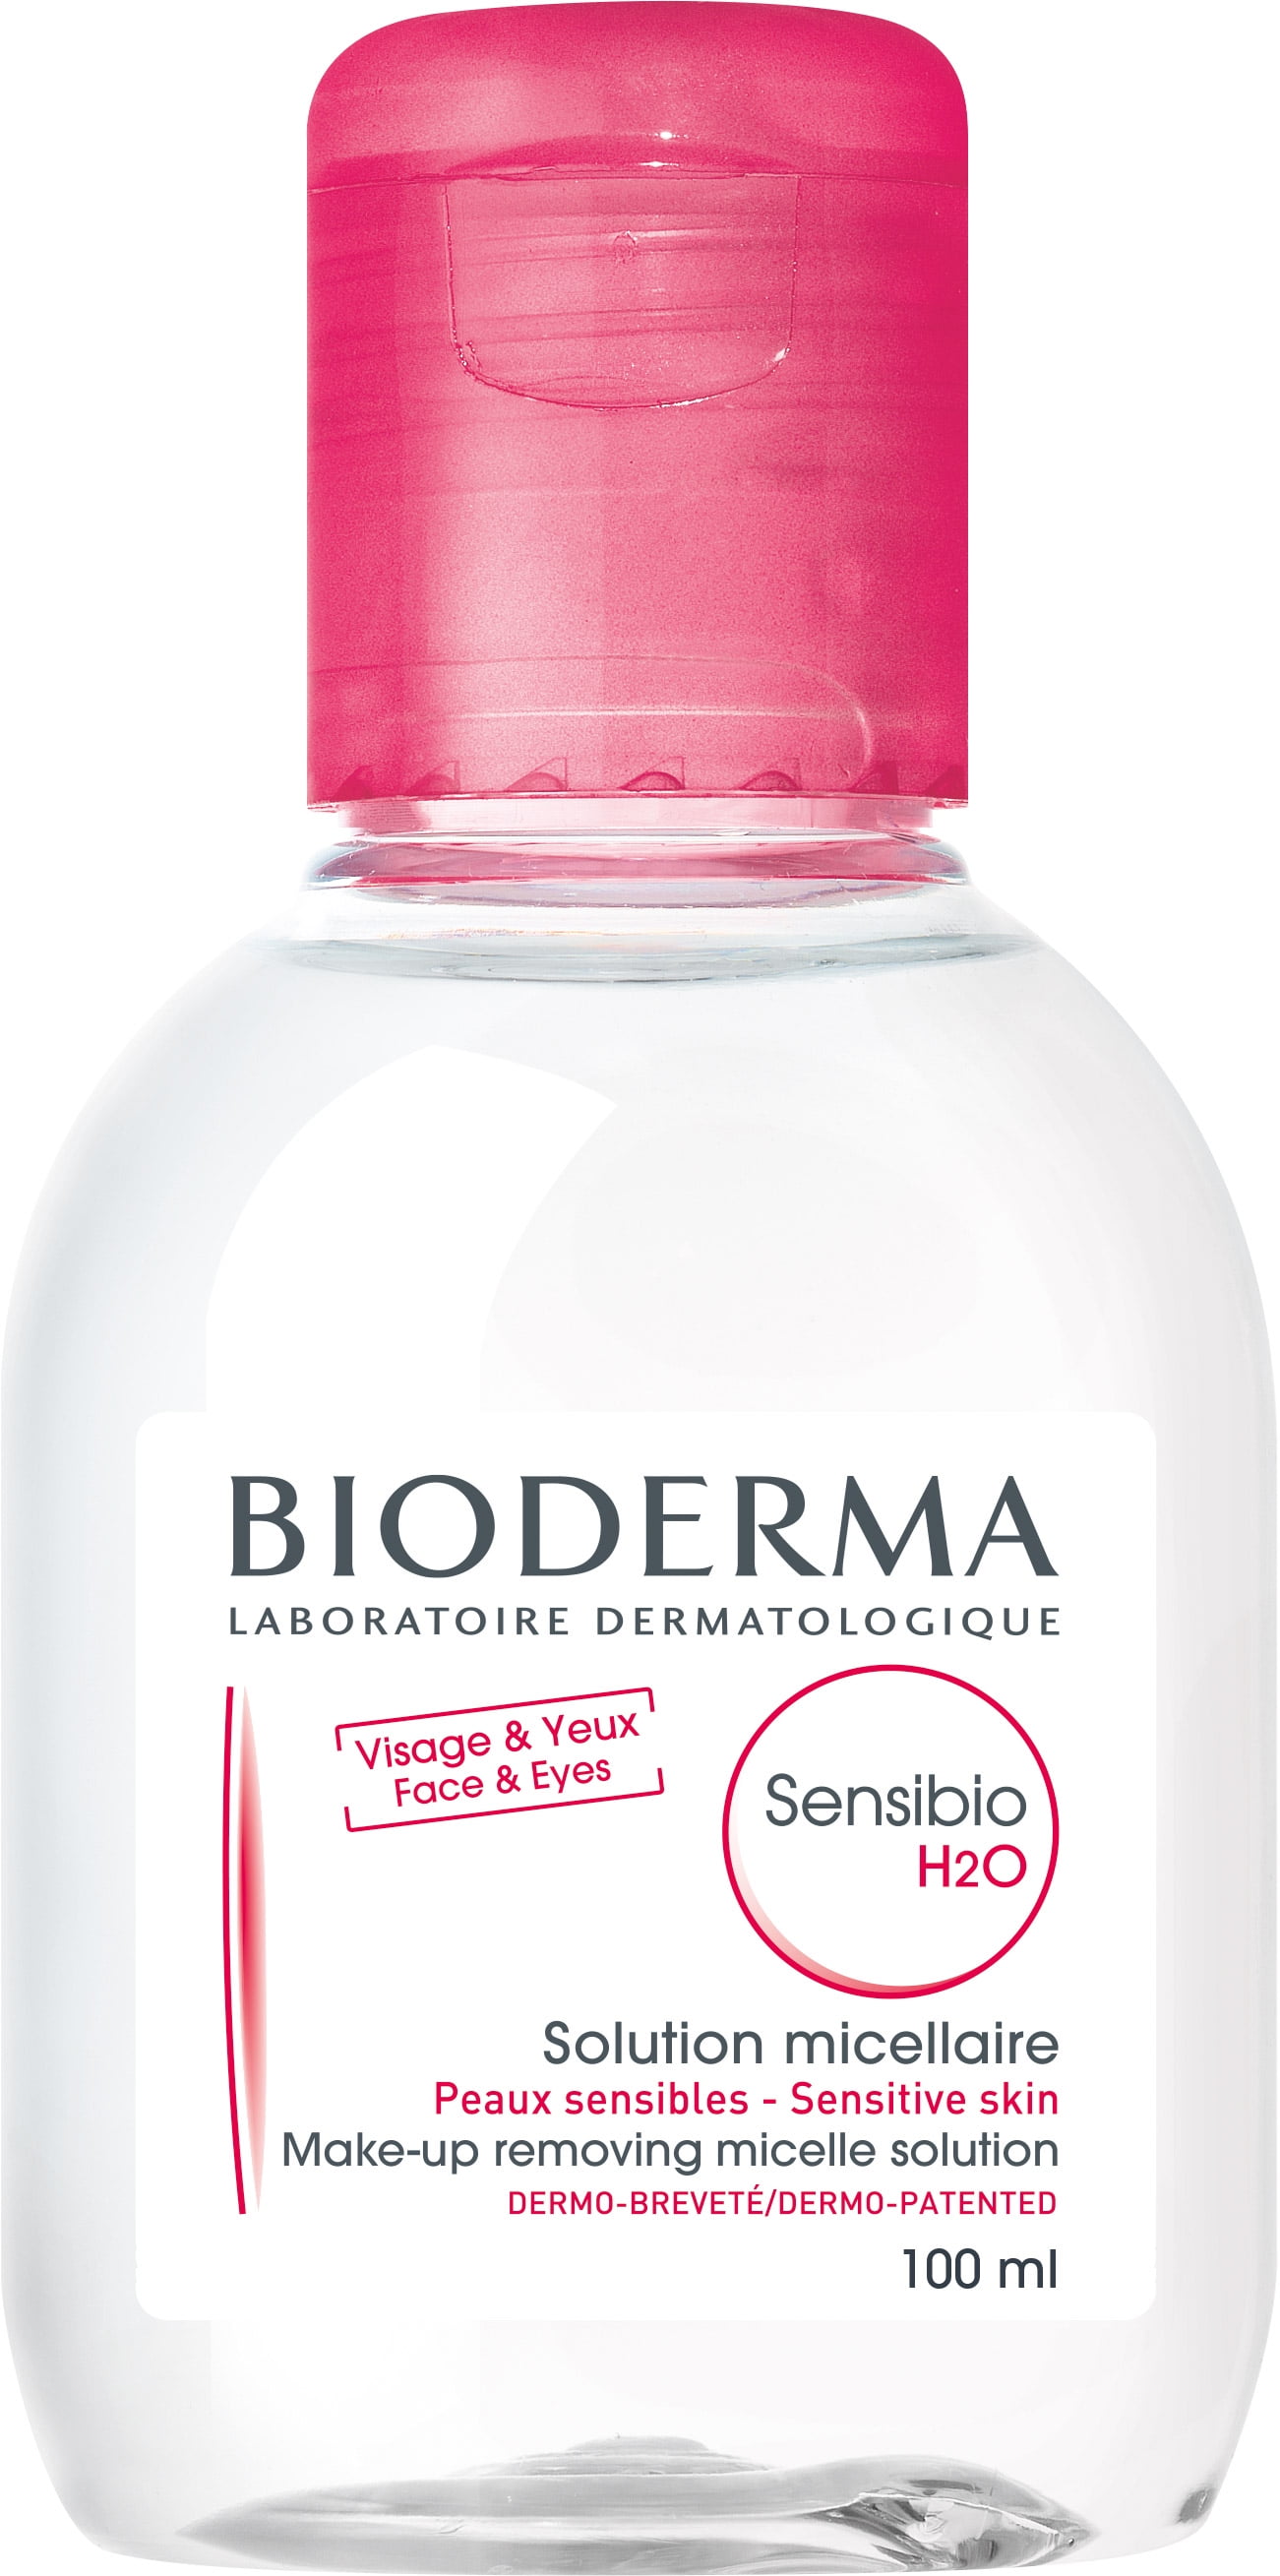 Bioderma - Sensibio, H2O Soothing Micellar Cleansing Water and Makeup  Removing Solution for Sensitive Skin - Face and Eyes - 16.7 fl.oz. 